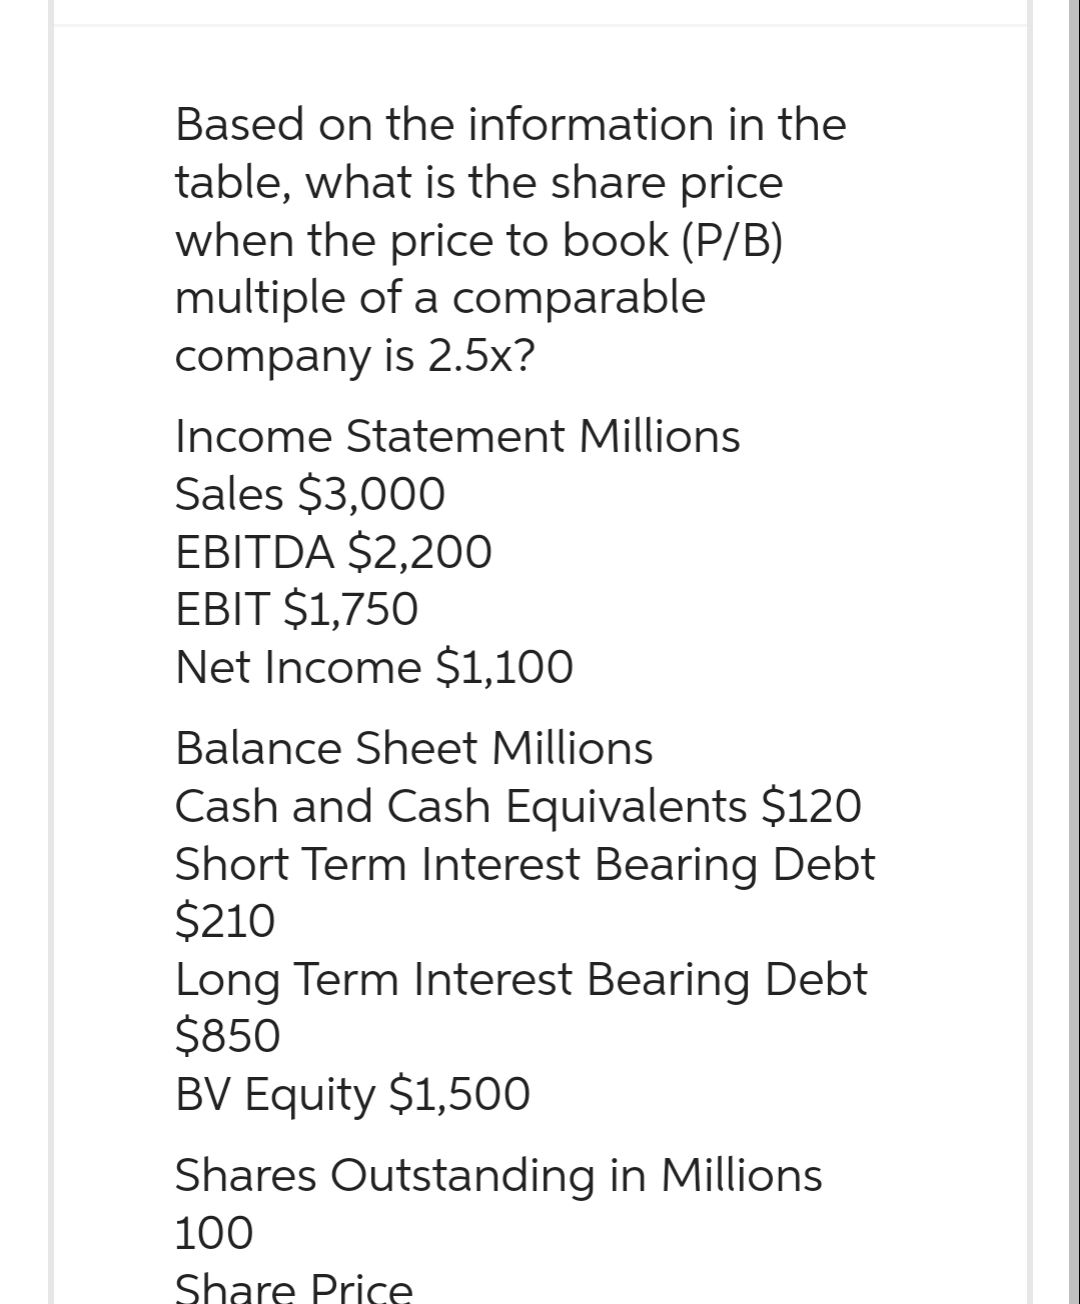 Based on the information in the
table, what is the share price
when the price to book (P/B)
multiple of a comparable
company is 2.5x?
Income Statement Millions
Sales $3,000
EBITDA $2,200
EBIT $1,750
Net Income $1,100
Balance Sheet Millions
Cash and Cash Equivalents $120
Short Term Interest Bearing Debt
$210
Long Term Interest Bearing Debt
$850
BV Equity $1,500
Shares Outstanding in Millions
100
Share Price